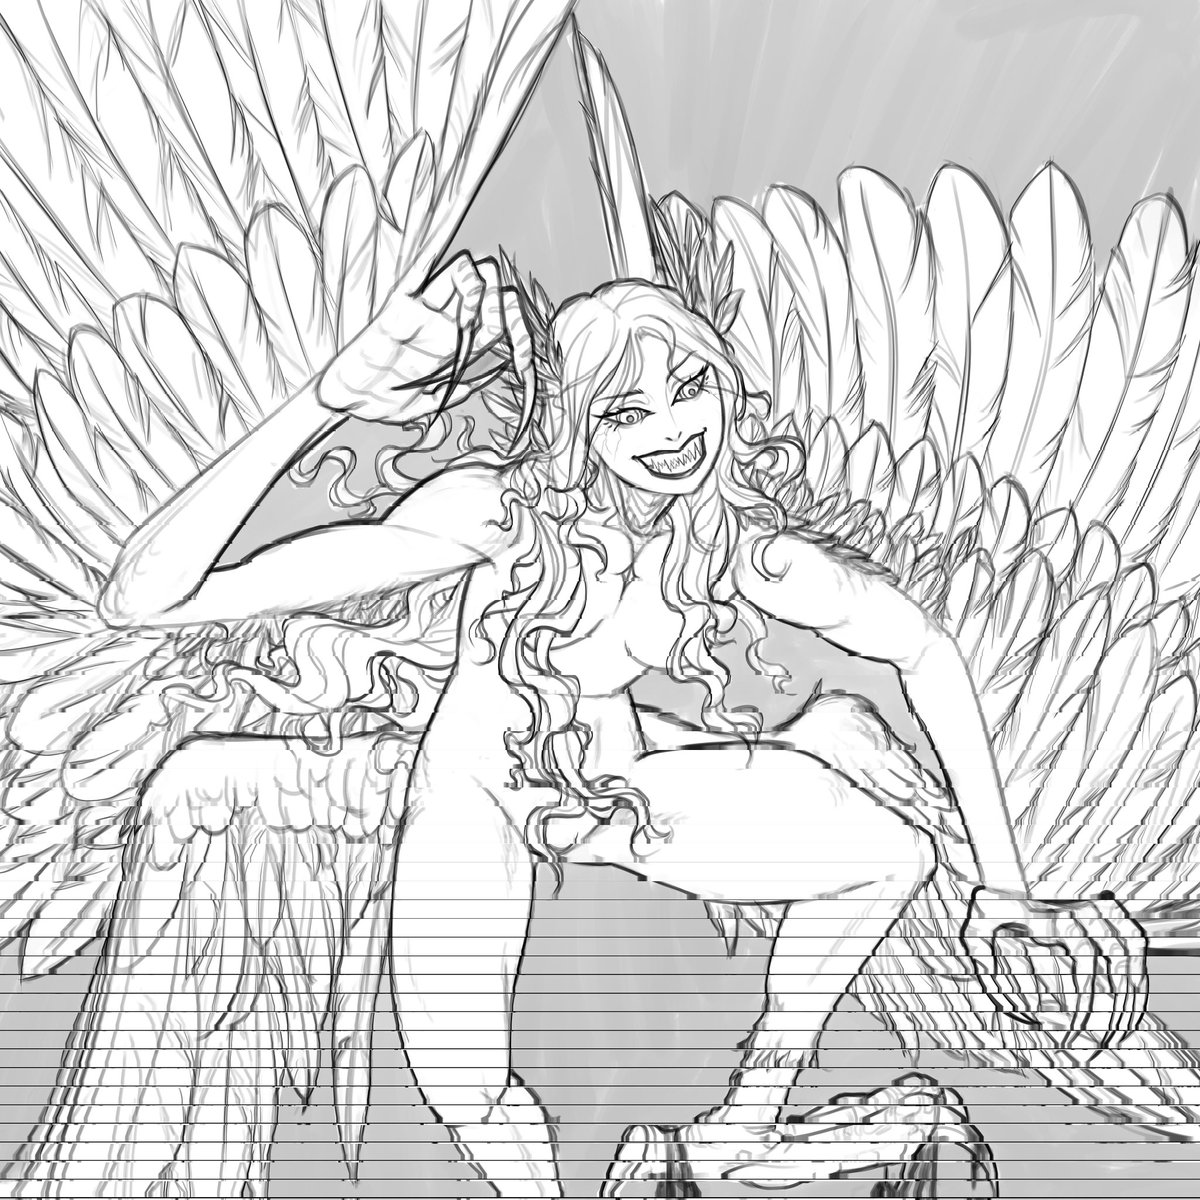 I haven't drawn this version of her in so long >w< almost 3 years now, seemingly 0.0

I don't know why, given how much it is to draw harpies XD

#wip #oc #ocart #harpyart #harpy #ocsketch #characterart #charactersketch #characterdrawing